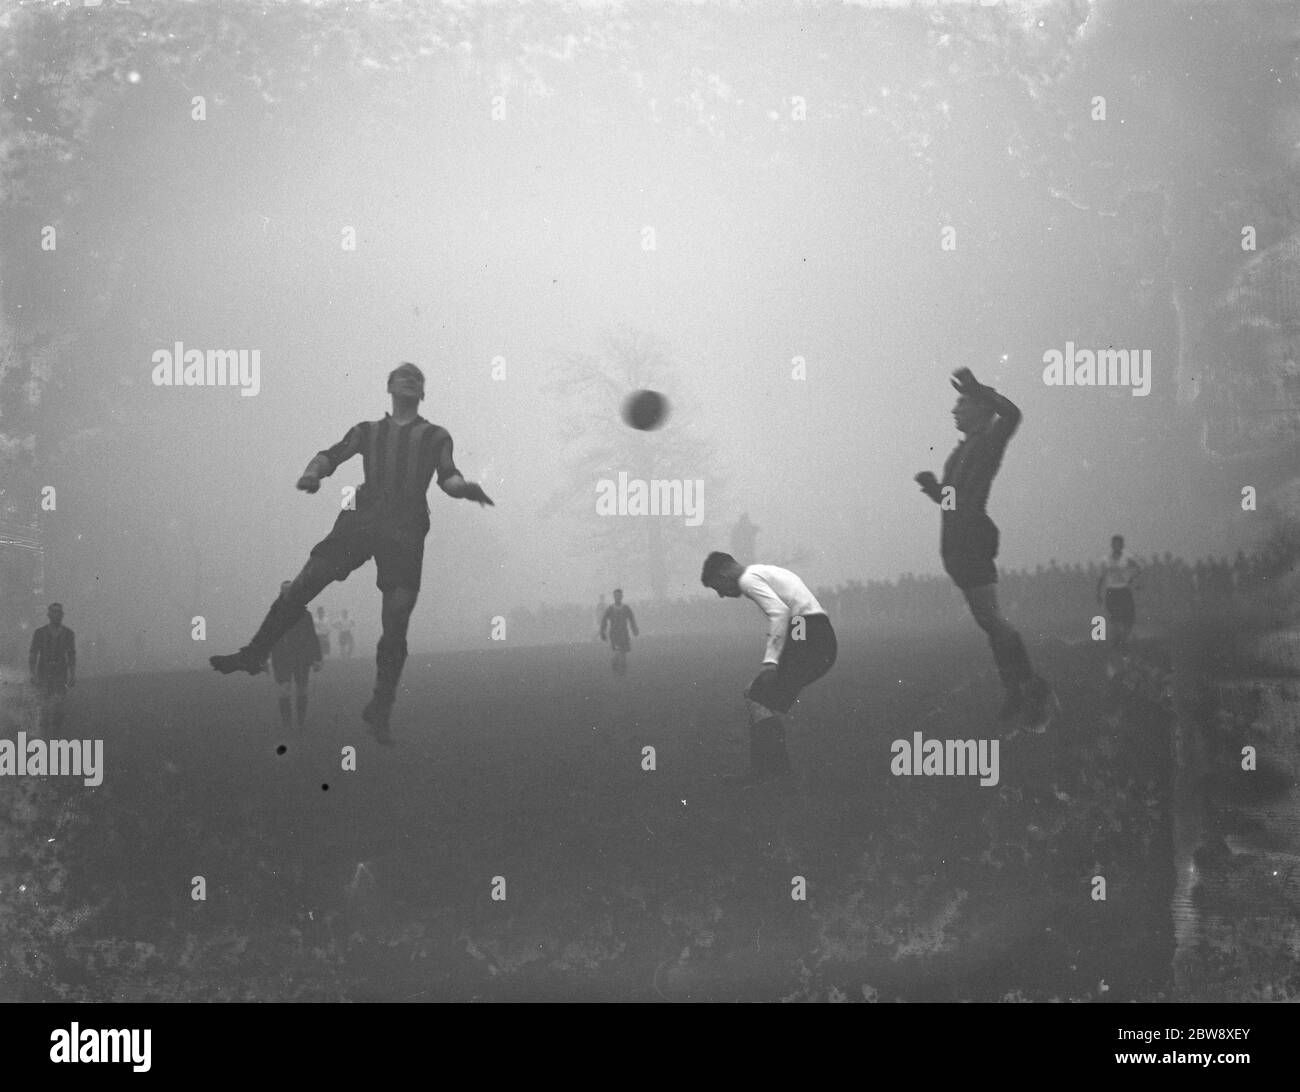 26 12 Black and White Stock Photos & Images - Alamy